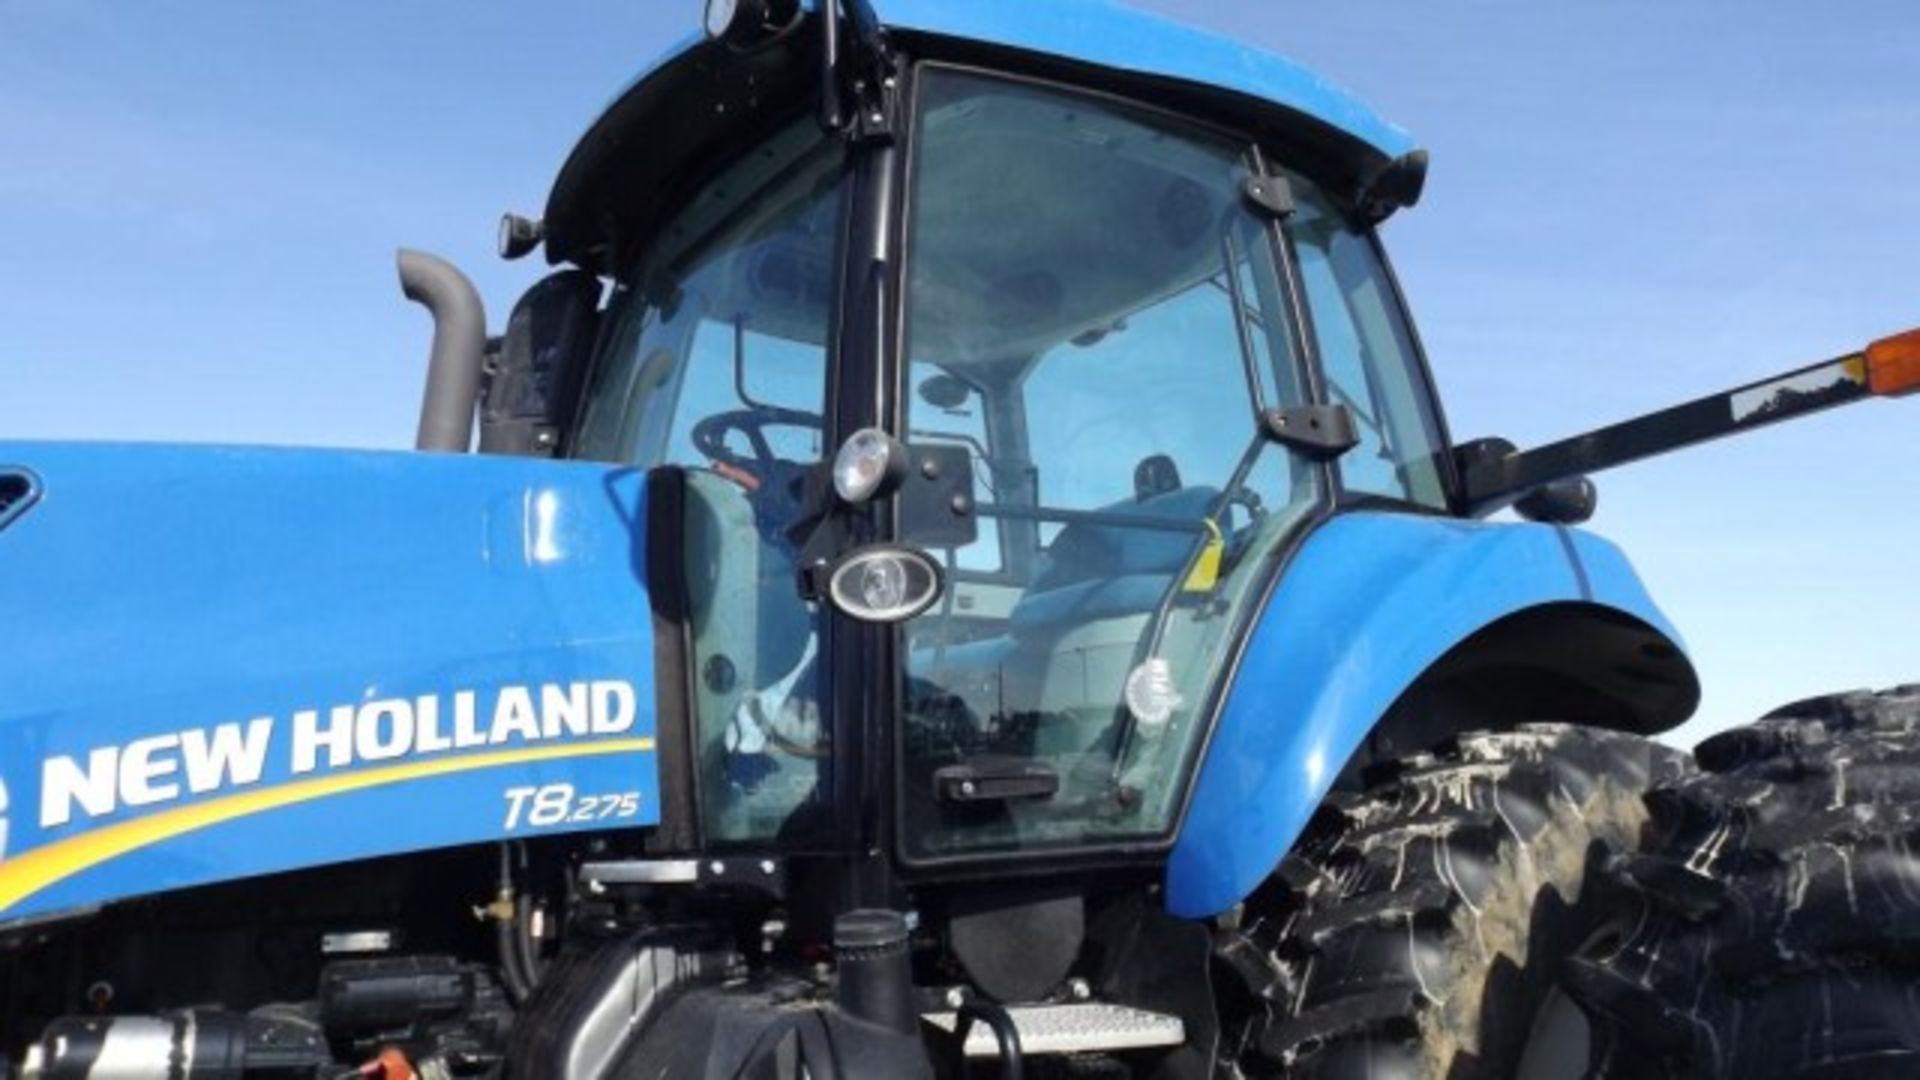 New Holland T8.275 Tractor '12, sn#ZCRC03823 2101 Hrs, MFWD, Deluxe Cab, Buddy Seat, 235 HP, 18/4 - Image 8 of 18